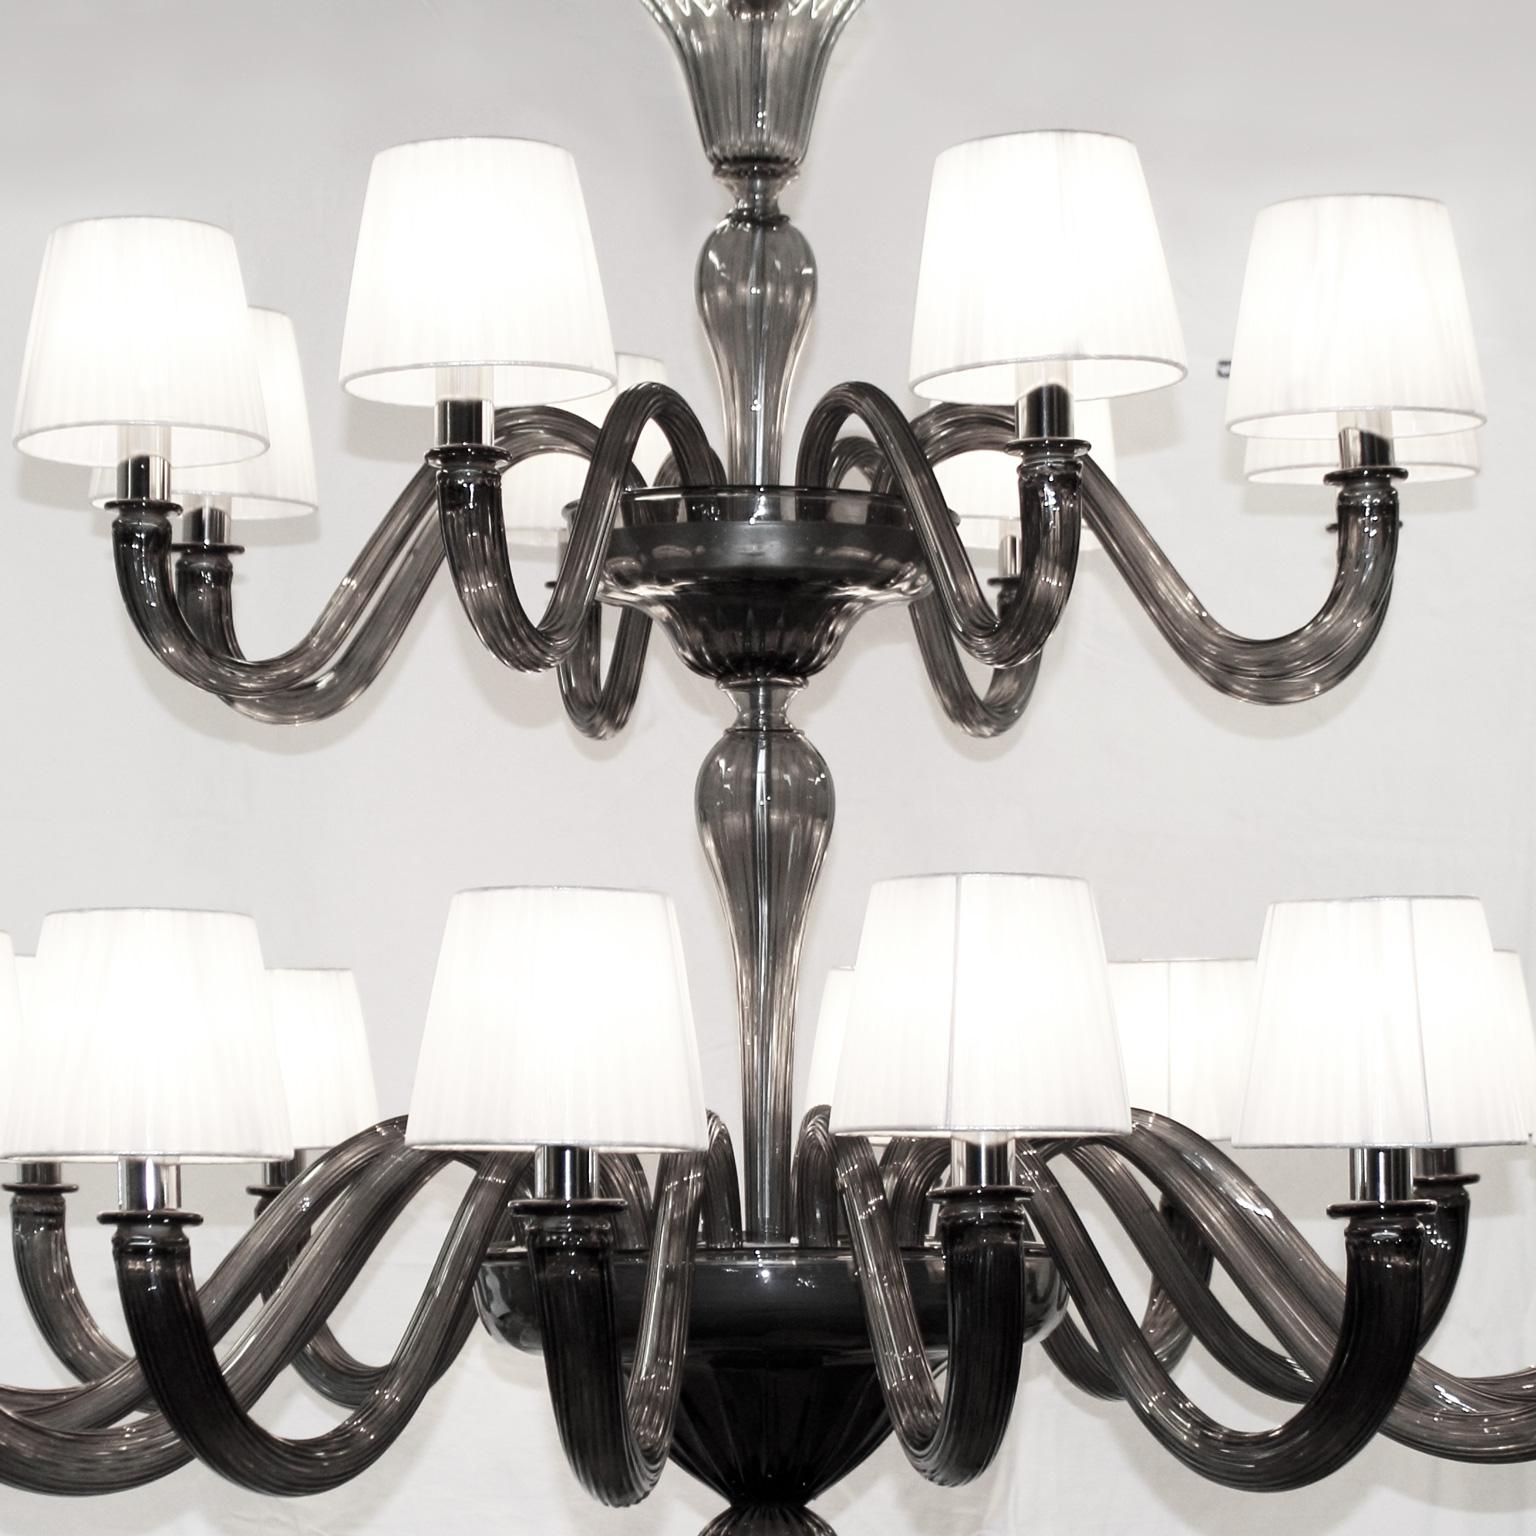 Chapeau is a Classic and essential chandelier, it is handcrafted using high quality materials in Murano glass and handmade organza lampshades.
This Murano glass chandelier is finished with handmade lampshades, and it is available in many different